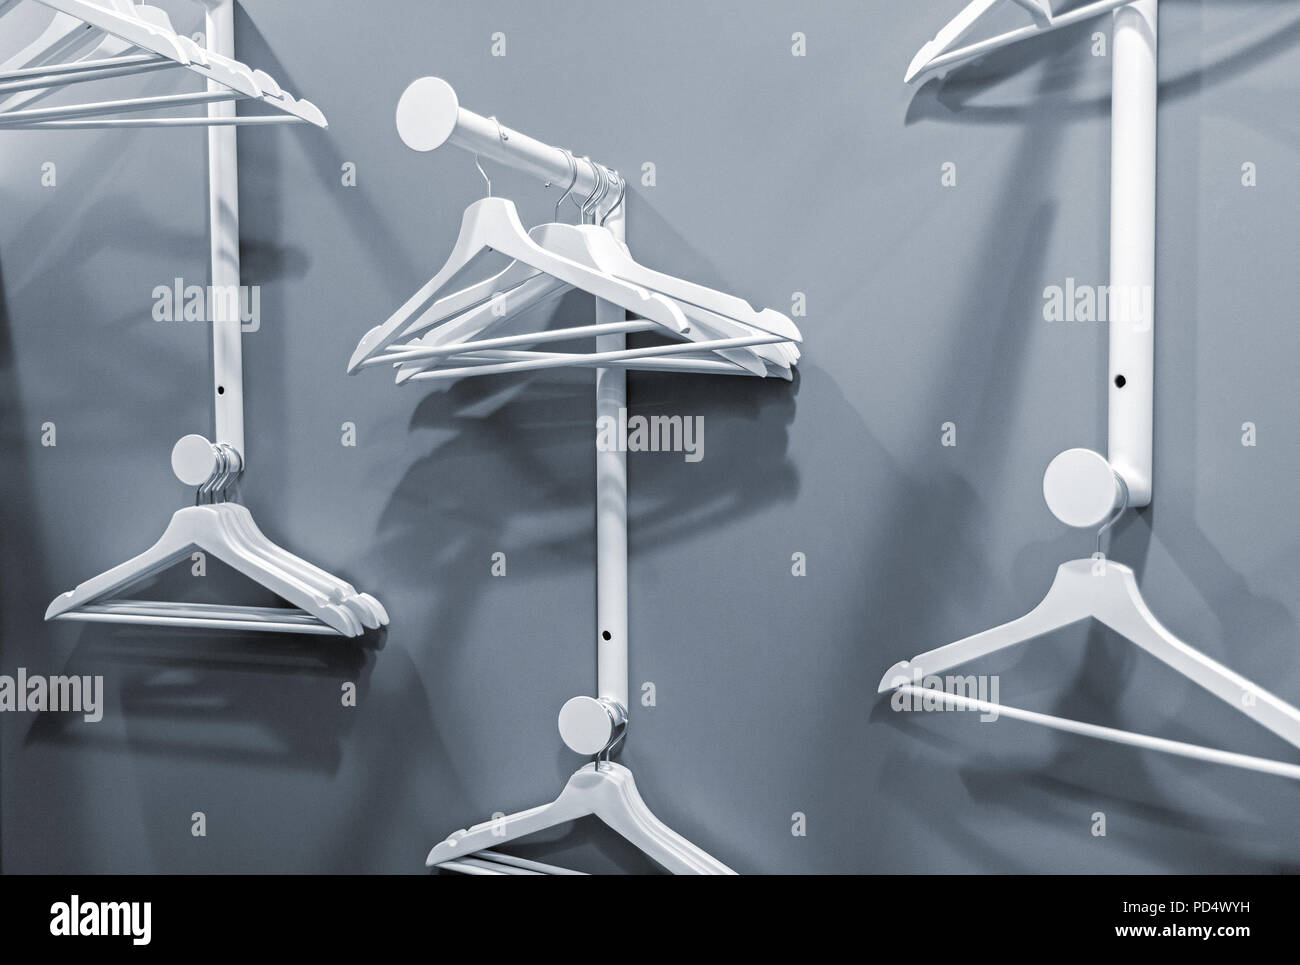 Empty hangers hanging on a clothes rack in the office dressing room, abstract looking indoors interior picture Stock Photo